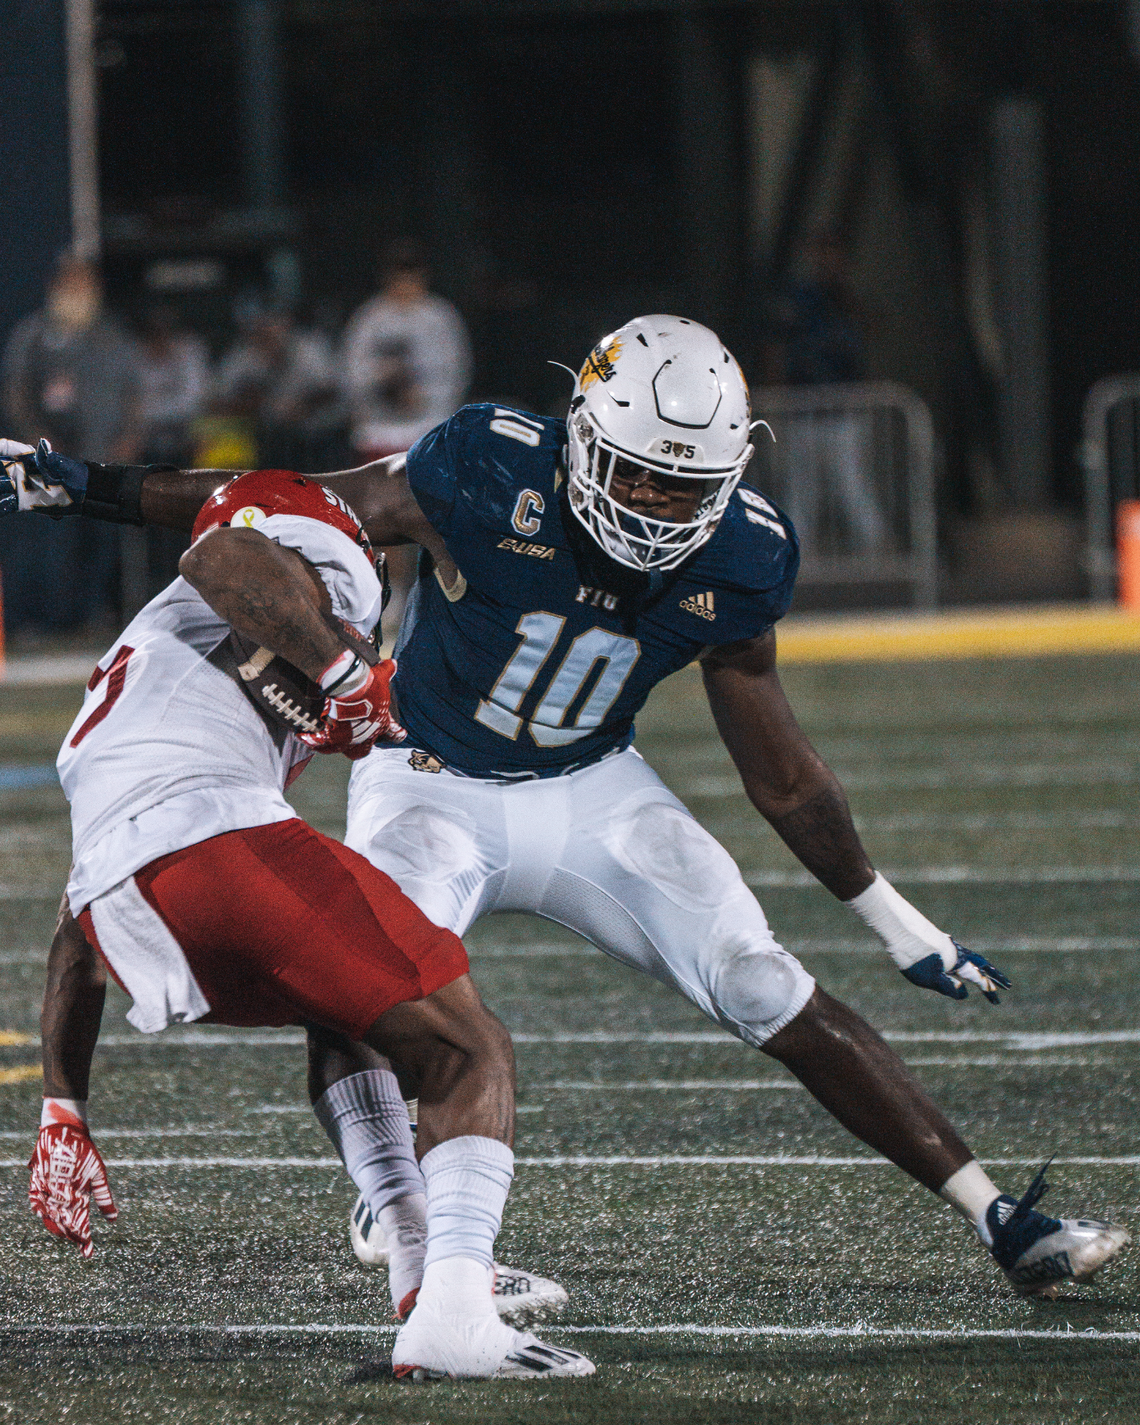 FIU middle linebacker Donovan Manuel has emerged as one of the top defensive players in Conference USA and is hoping to earn an opportunity to play in the NFL.